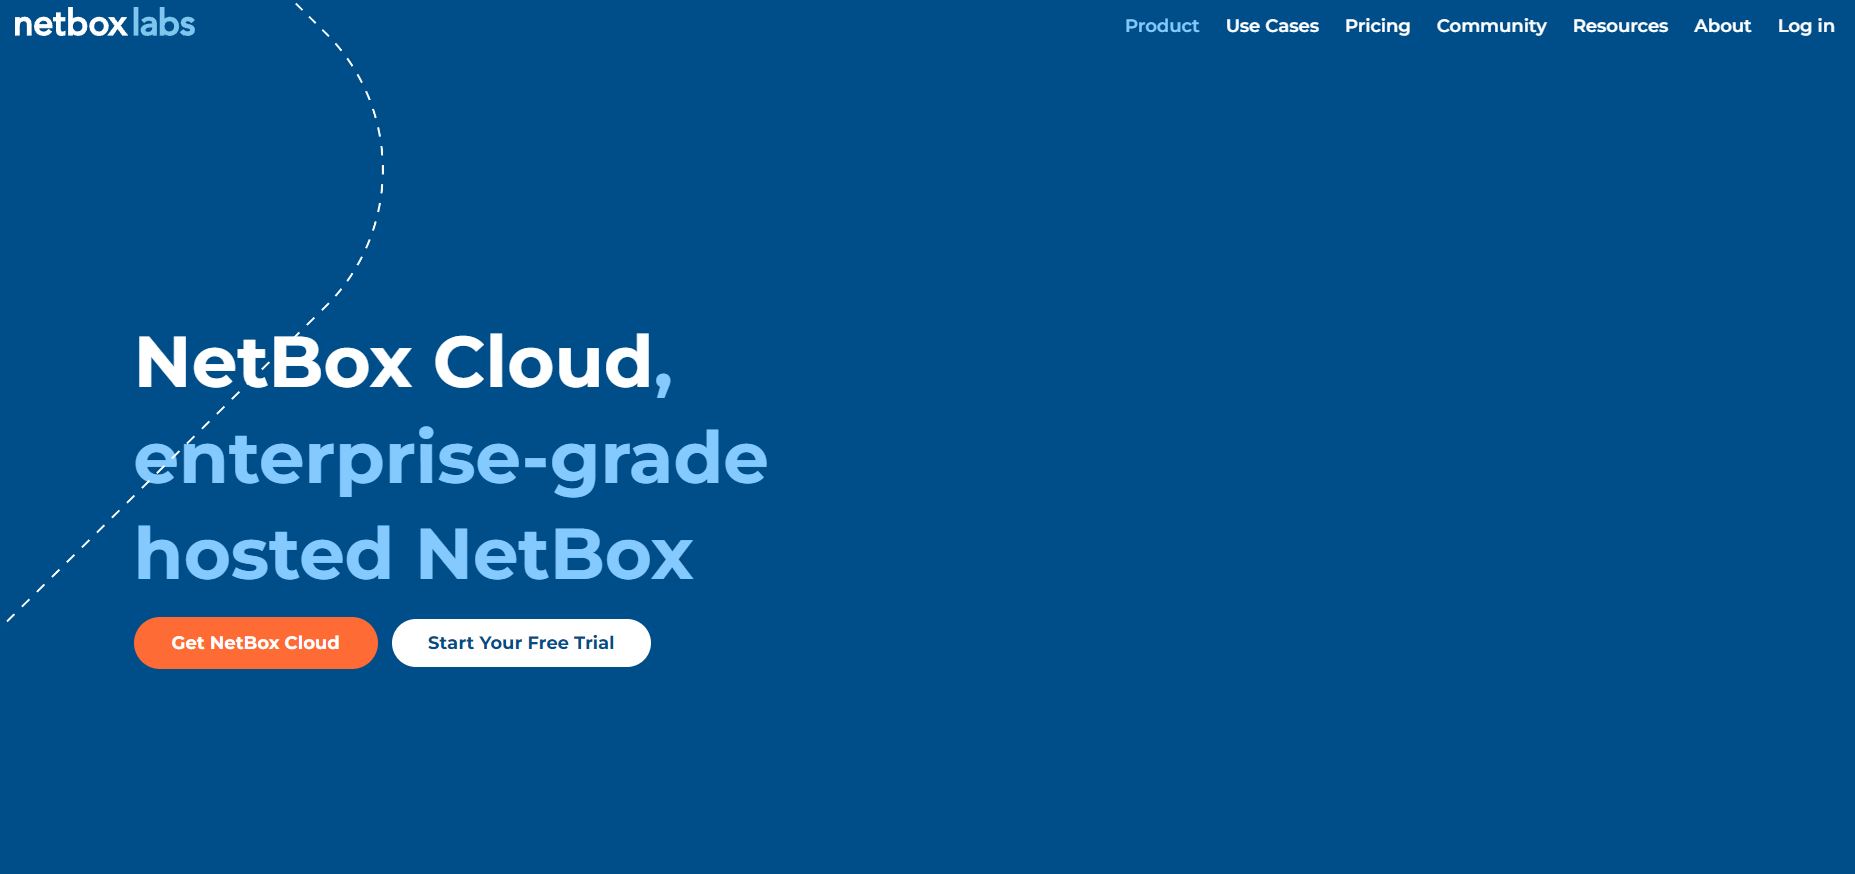 NetBox has recently raised $20M in Series A funding. Headquartered in New York, NY, NetBox Labs offers NetBox Cloud,